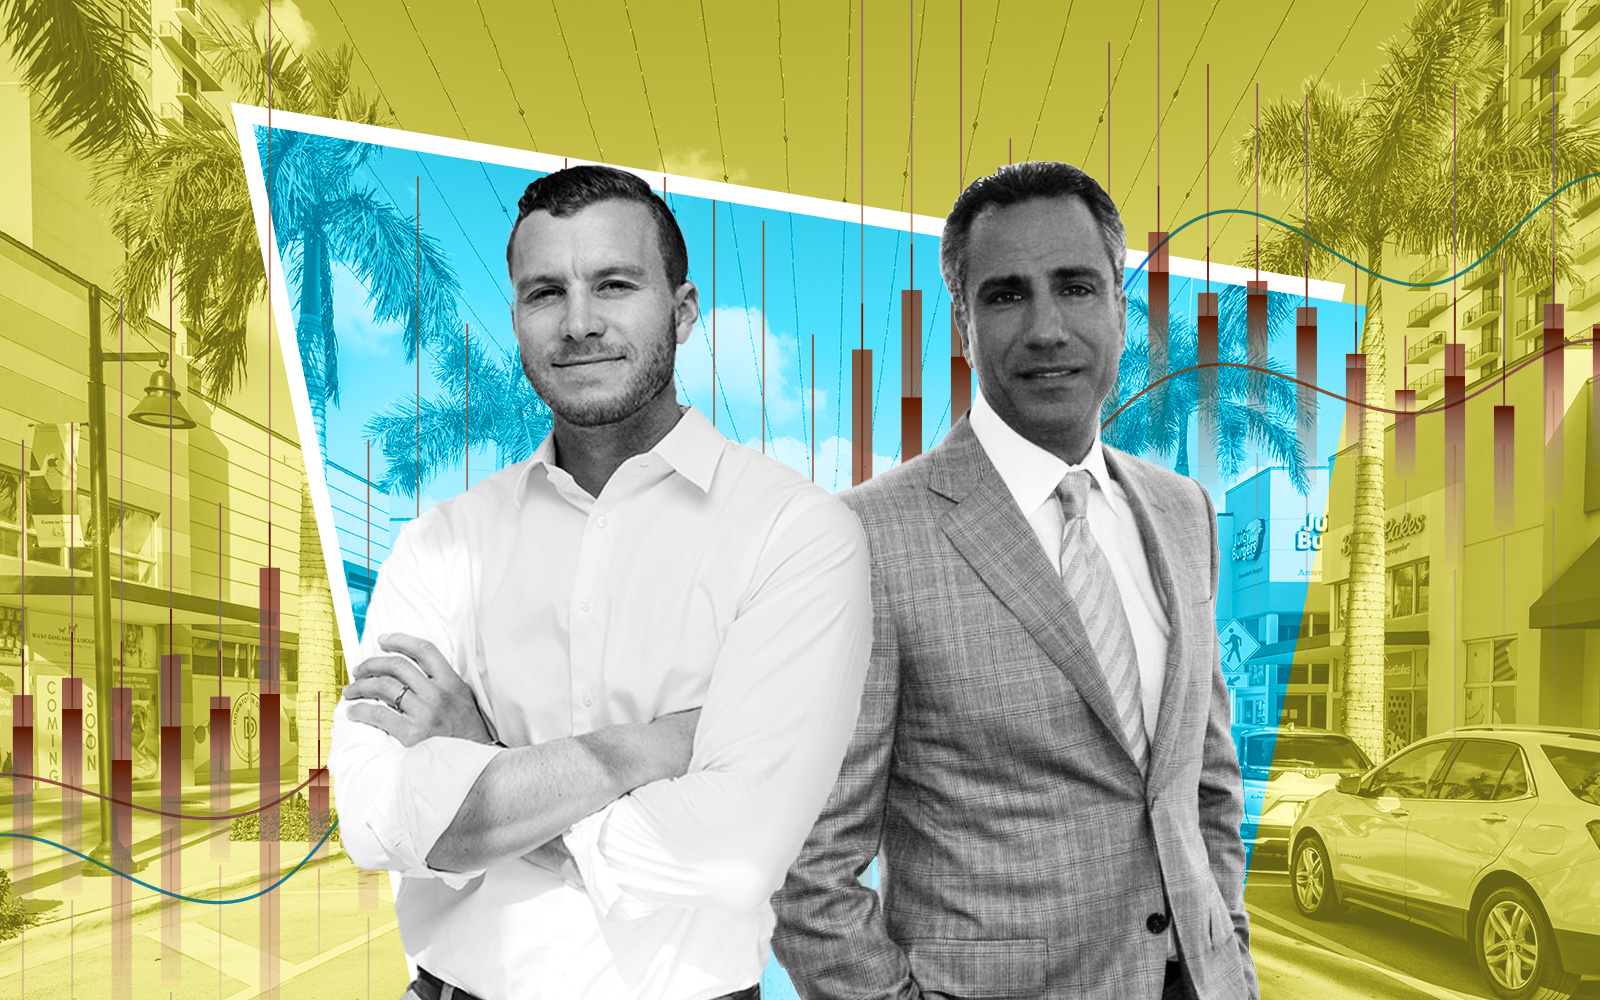 Native Realty’s Jaime Sturgis and Current Capital’s Todd Nepola